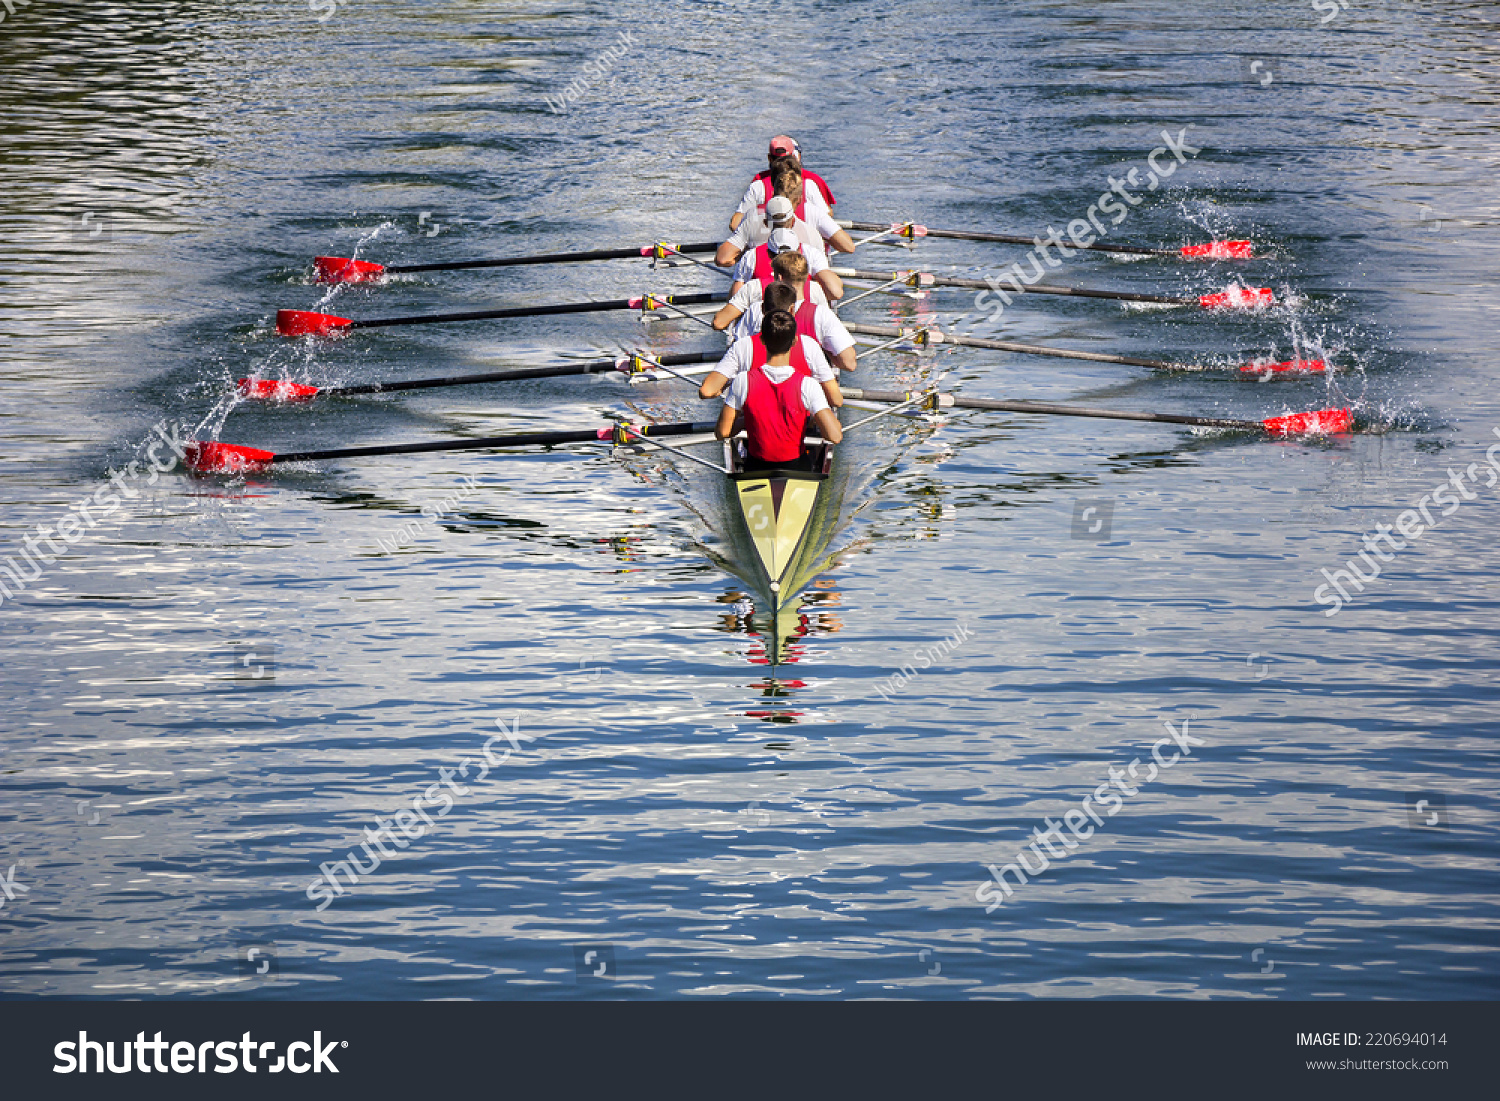 Rowers in eight-oar rowing boats on the tranquil lake #220694014